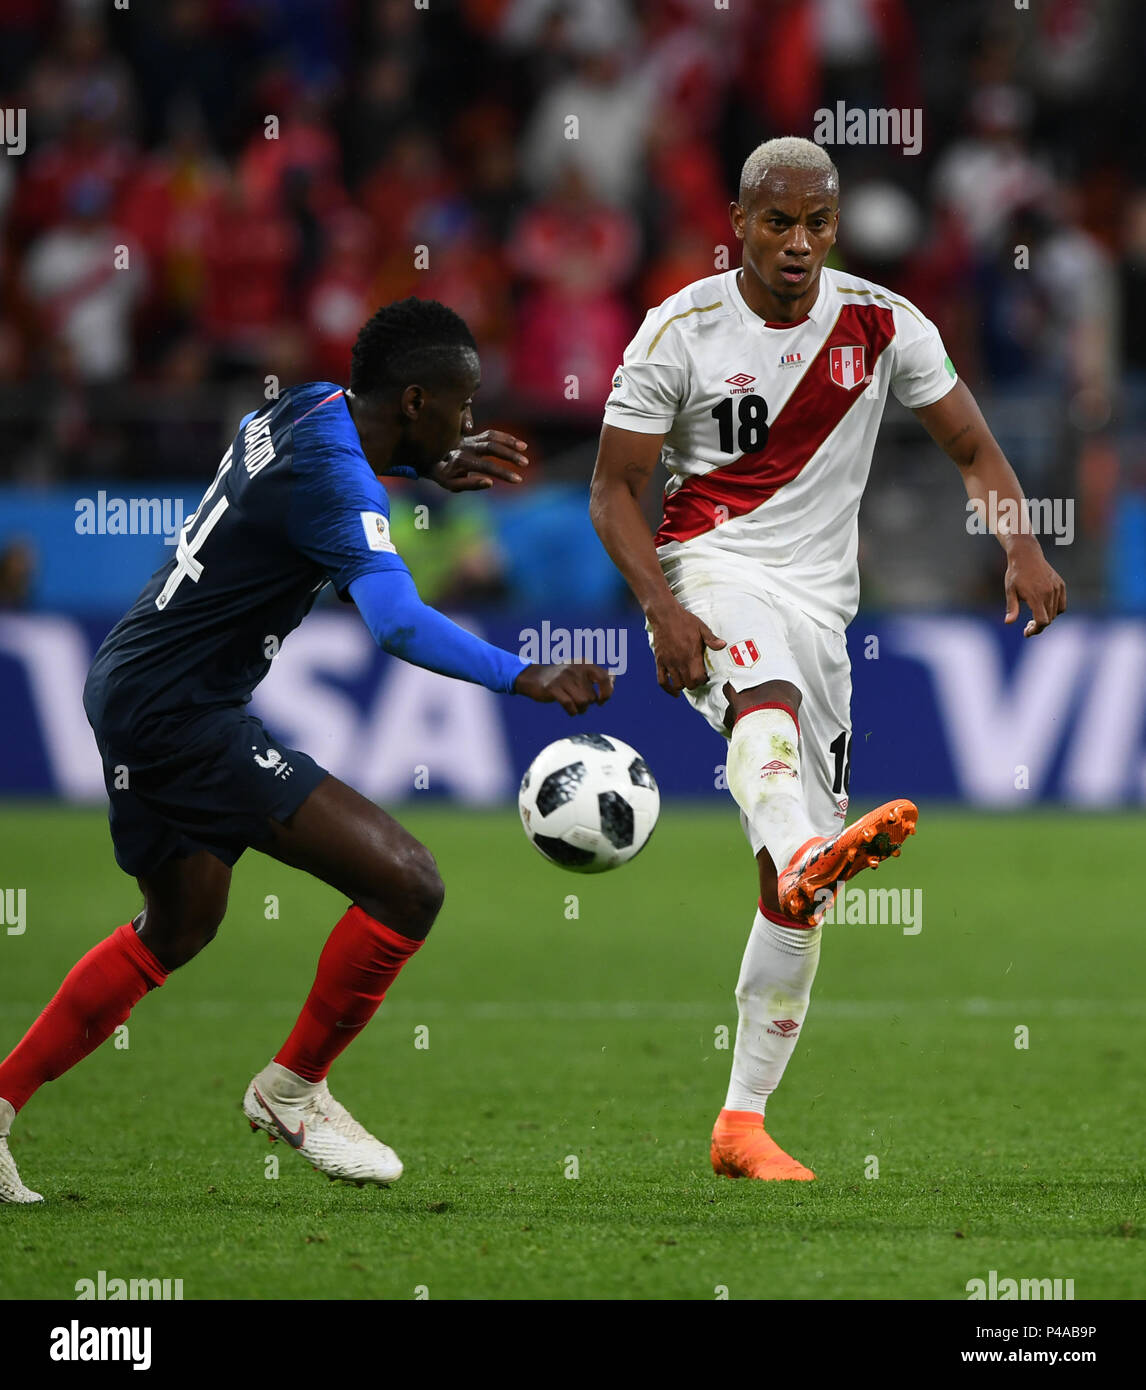 Yekaterinburg, Russia. 21st June, 2018. Blaise Matuidi (L) of France vies with Andre Carrillo of Peru during the 2018 FIFA World Cup Group C match between France and Peru in Yekaterinburg, Russia, June 21, 2018. Credit: Du Yu/Xinhua/Alamy Live News Stock Photo